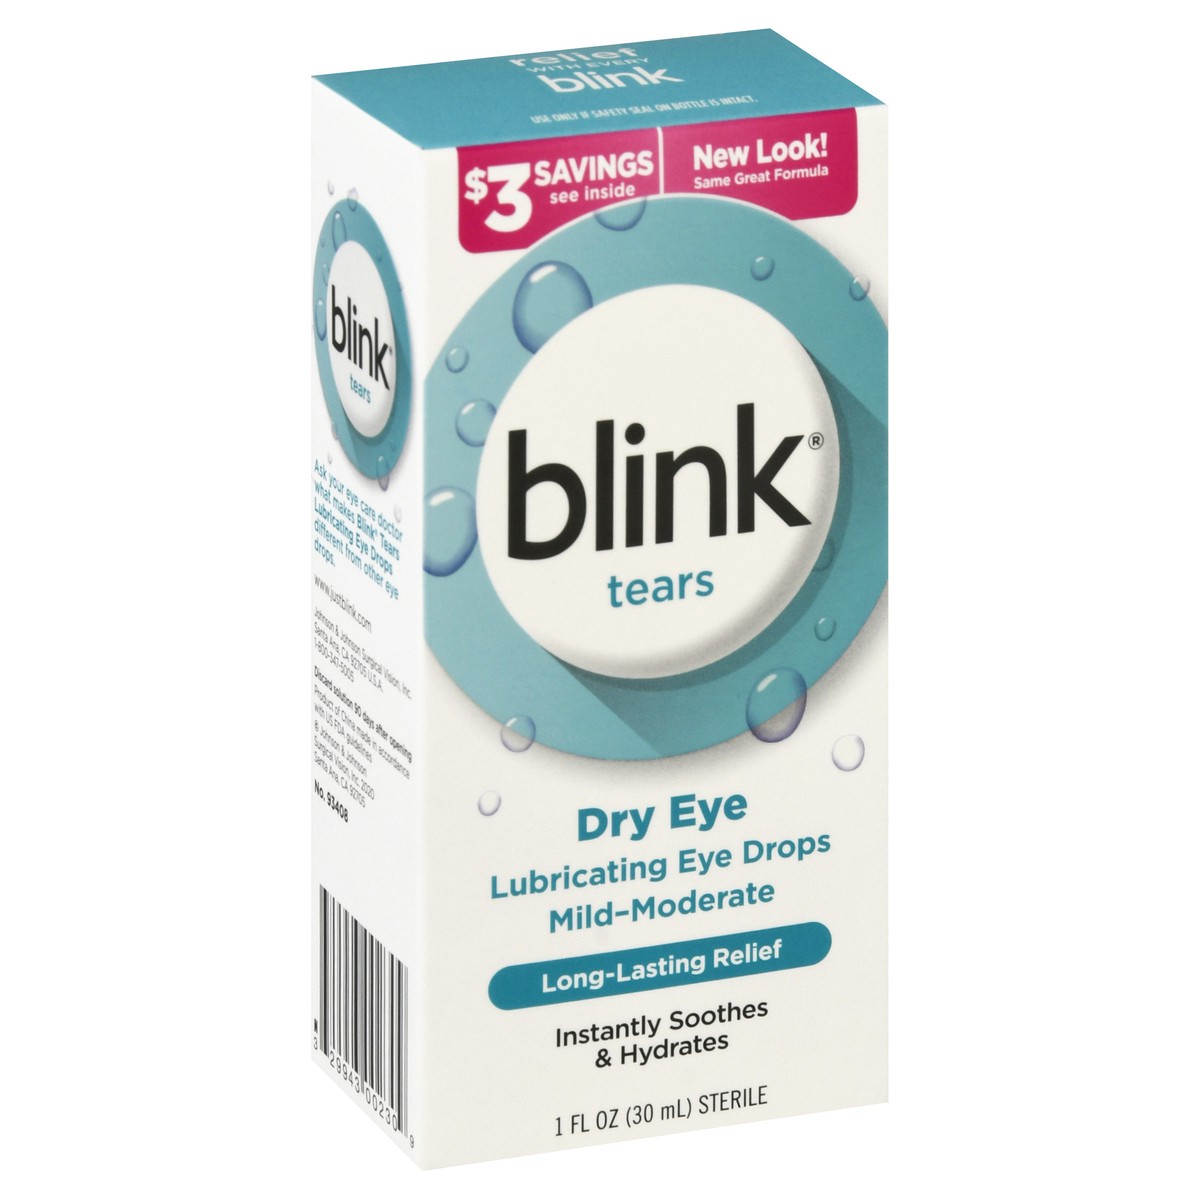 slide 2 of 9, Blink Tears Lubricating Eye Drops, Eye Care for Mild to Moderate Dry Eyes, Hyaluronate for Boosting Hydration, Moisturizing & Soothing Eye Drops for Dry Eyes, 1 fl oz (30 mL)
, 30 ml